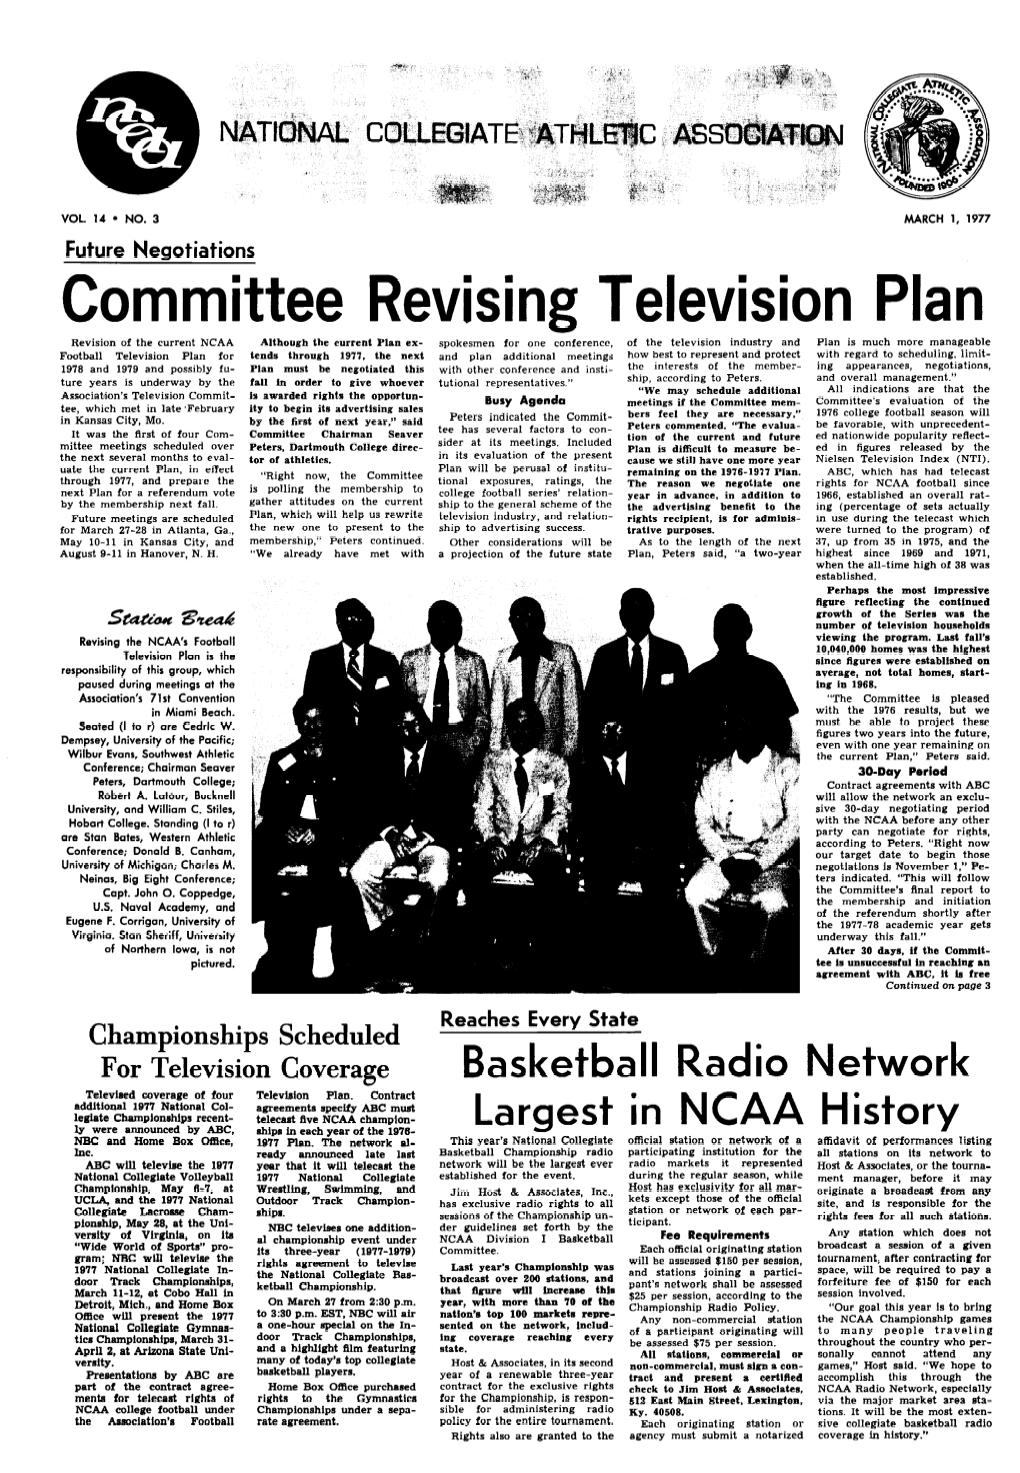 The NCAA NEWS Feels It Makes a Point and Discusses a Topic Tabling-A Dilatory Tactic Which Will Interest Readers